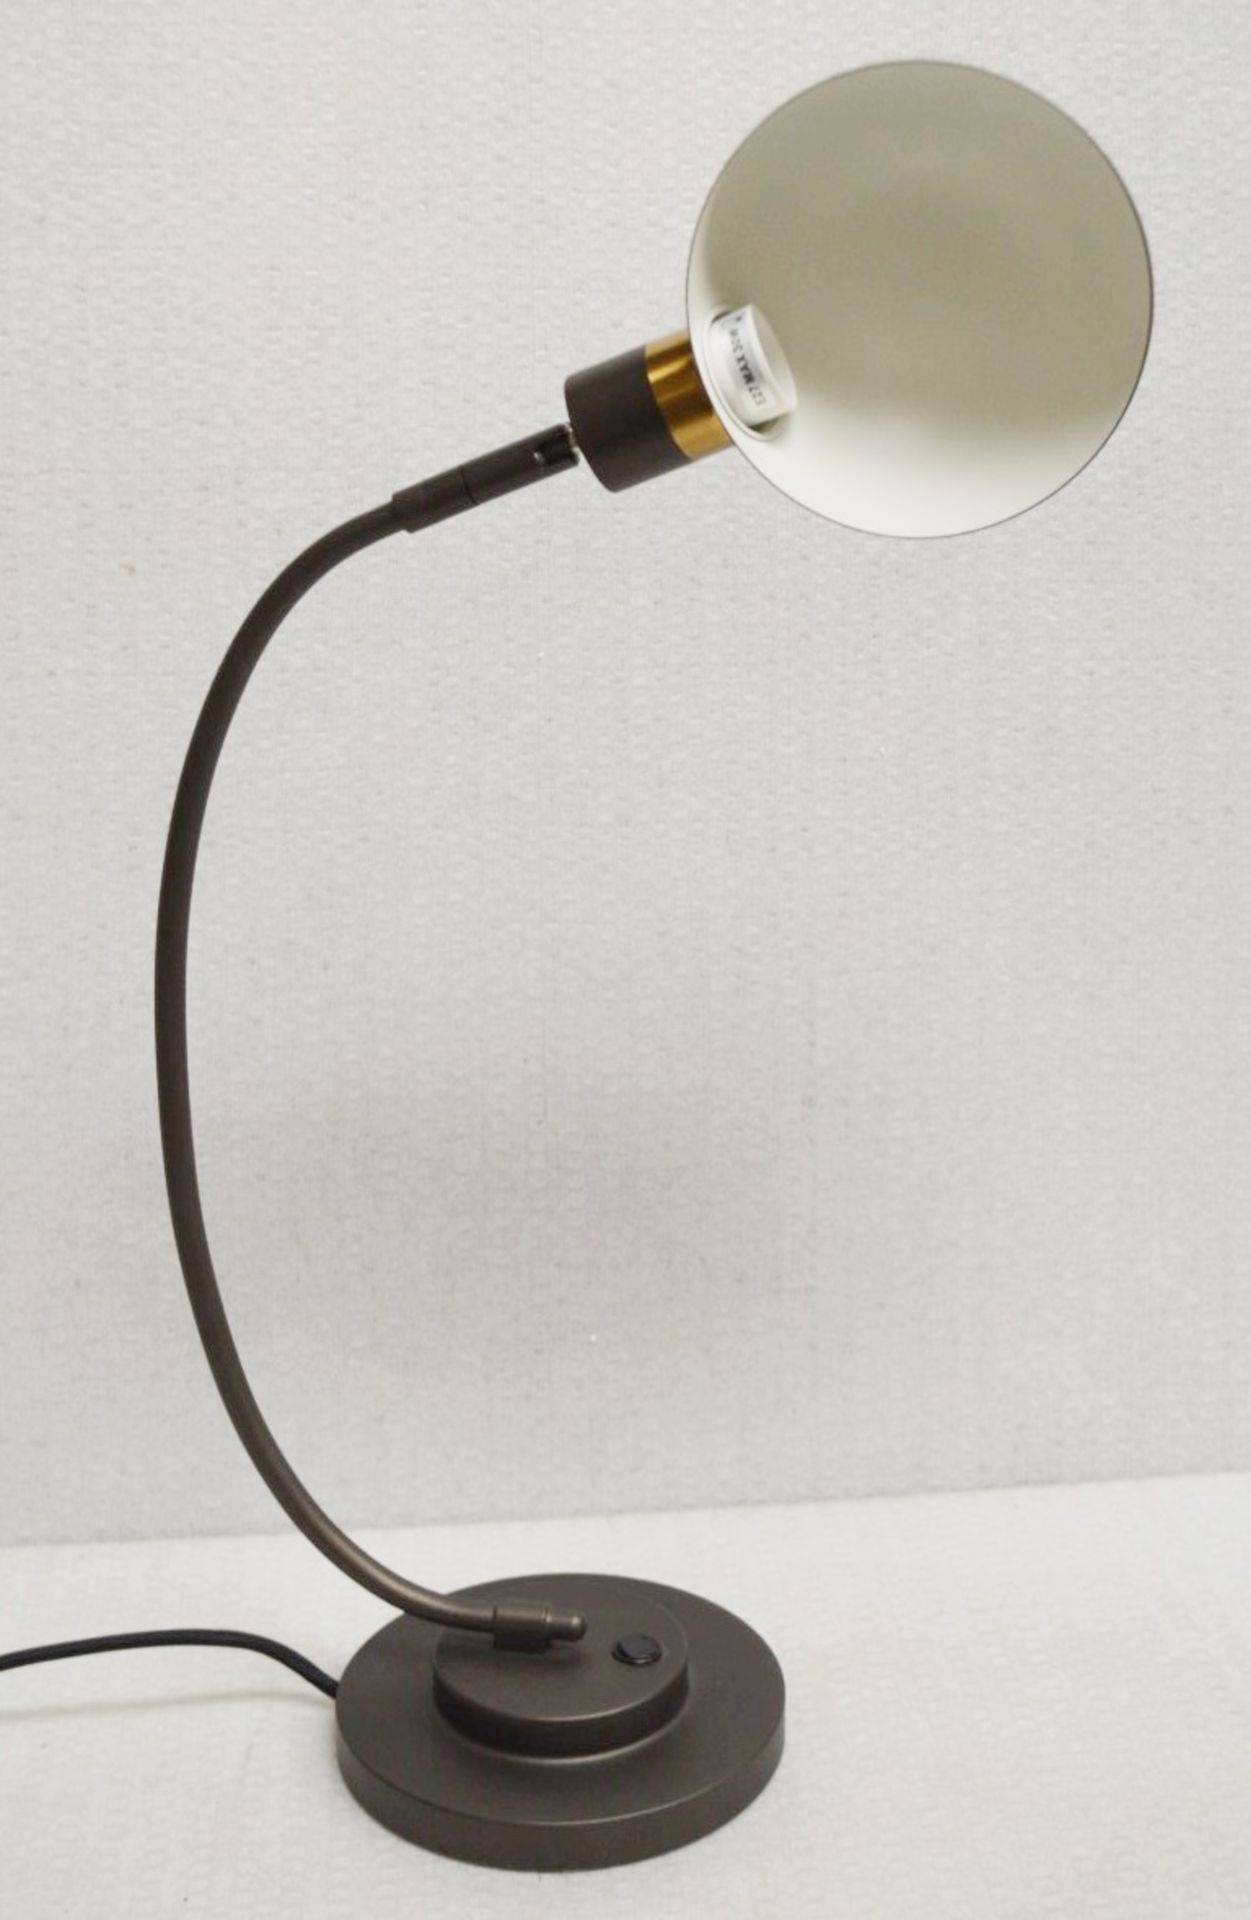 1 x CHELSOM Desk Table Lamp In A Black Bronze Finish With Polished Brass Accent - Image 2 of 7